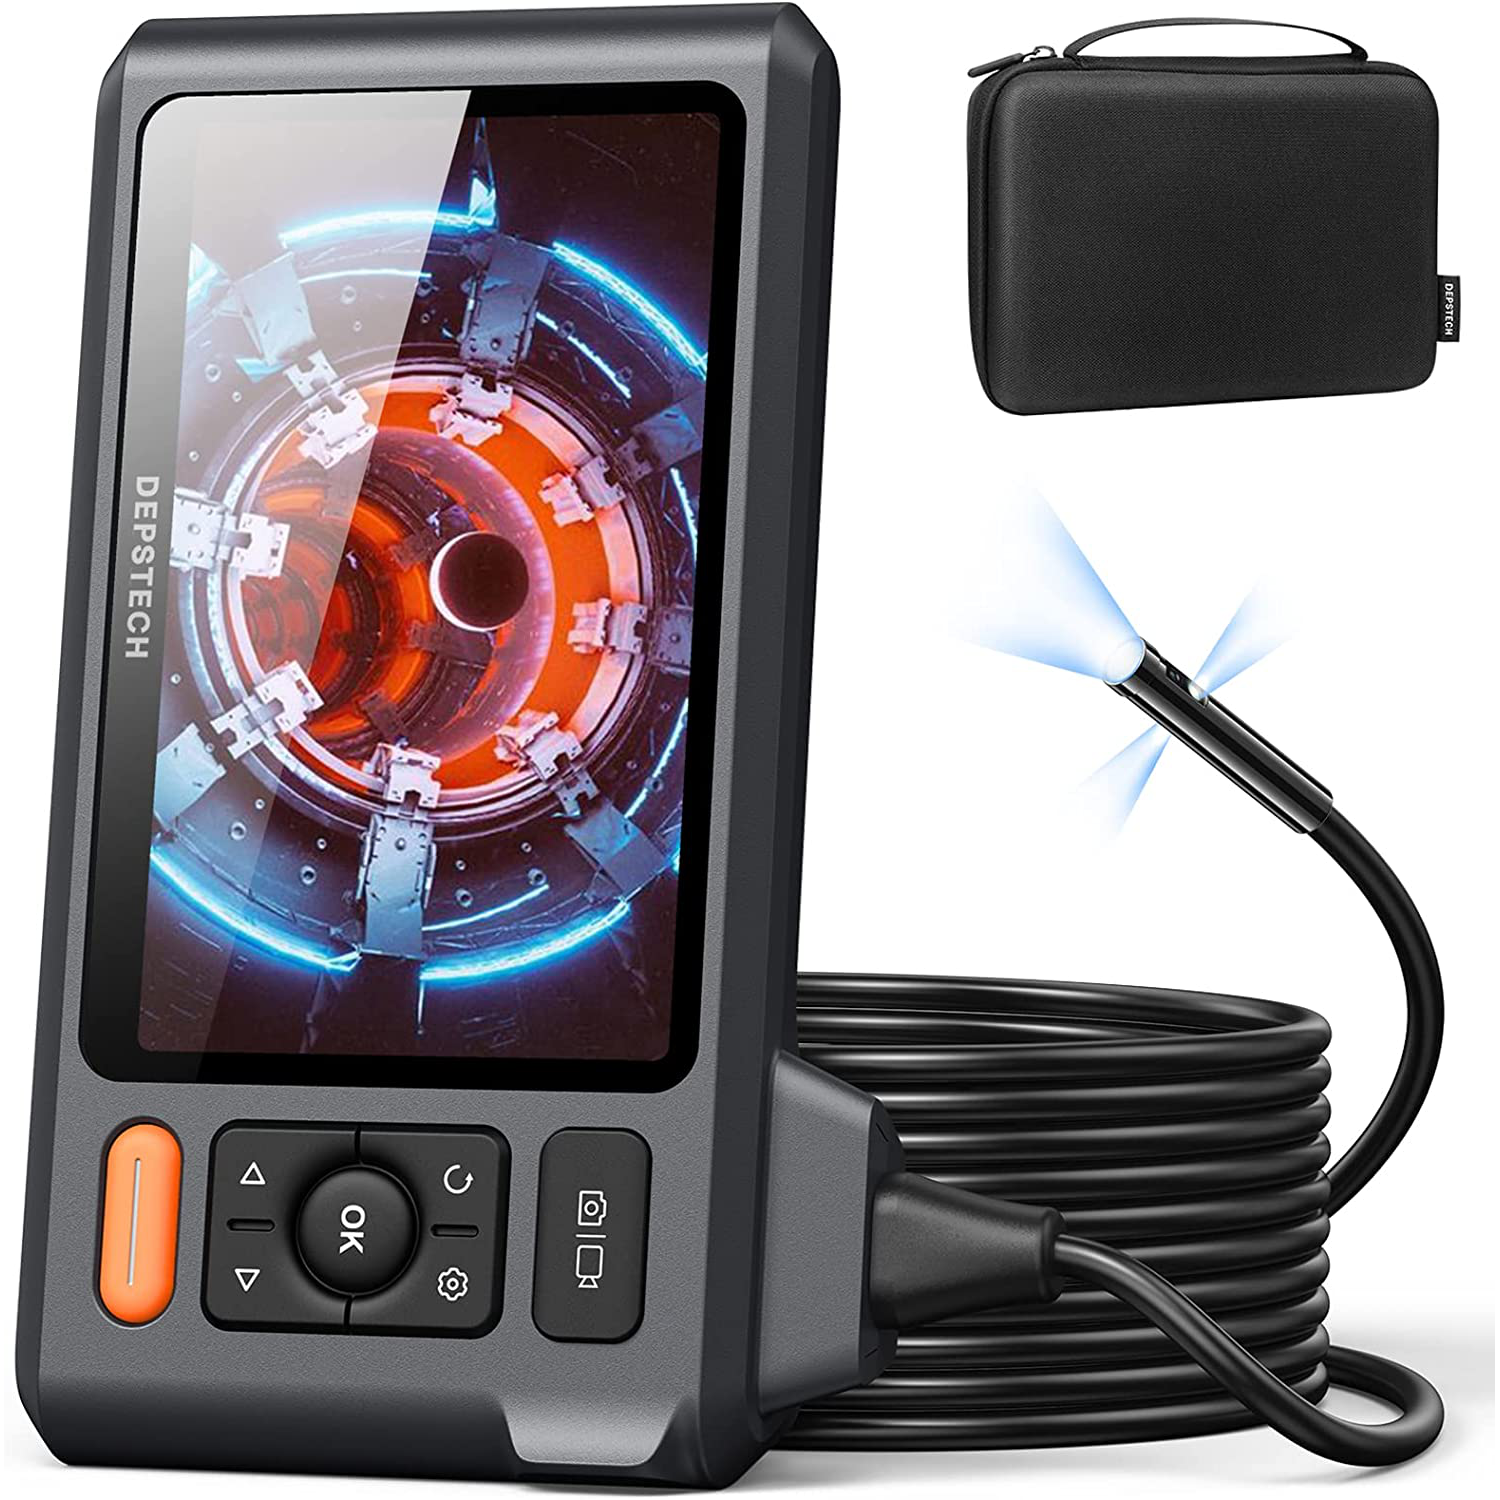 Triple Lens 1080P Borescope Inspection Camera with 5 IPS Screen, 10 LEDs 50ft / 15M